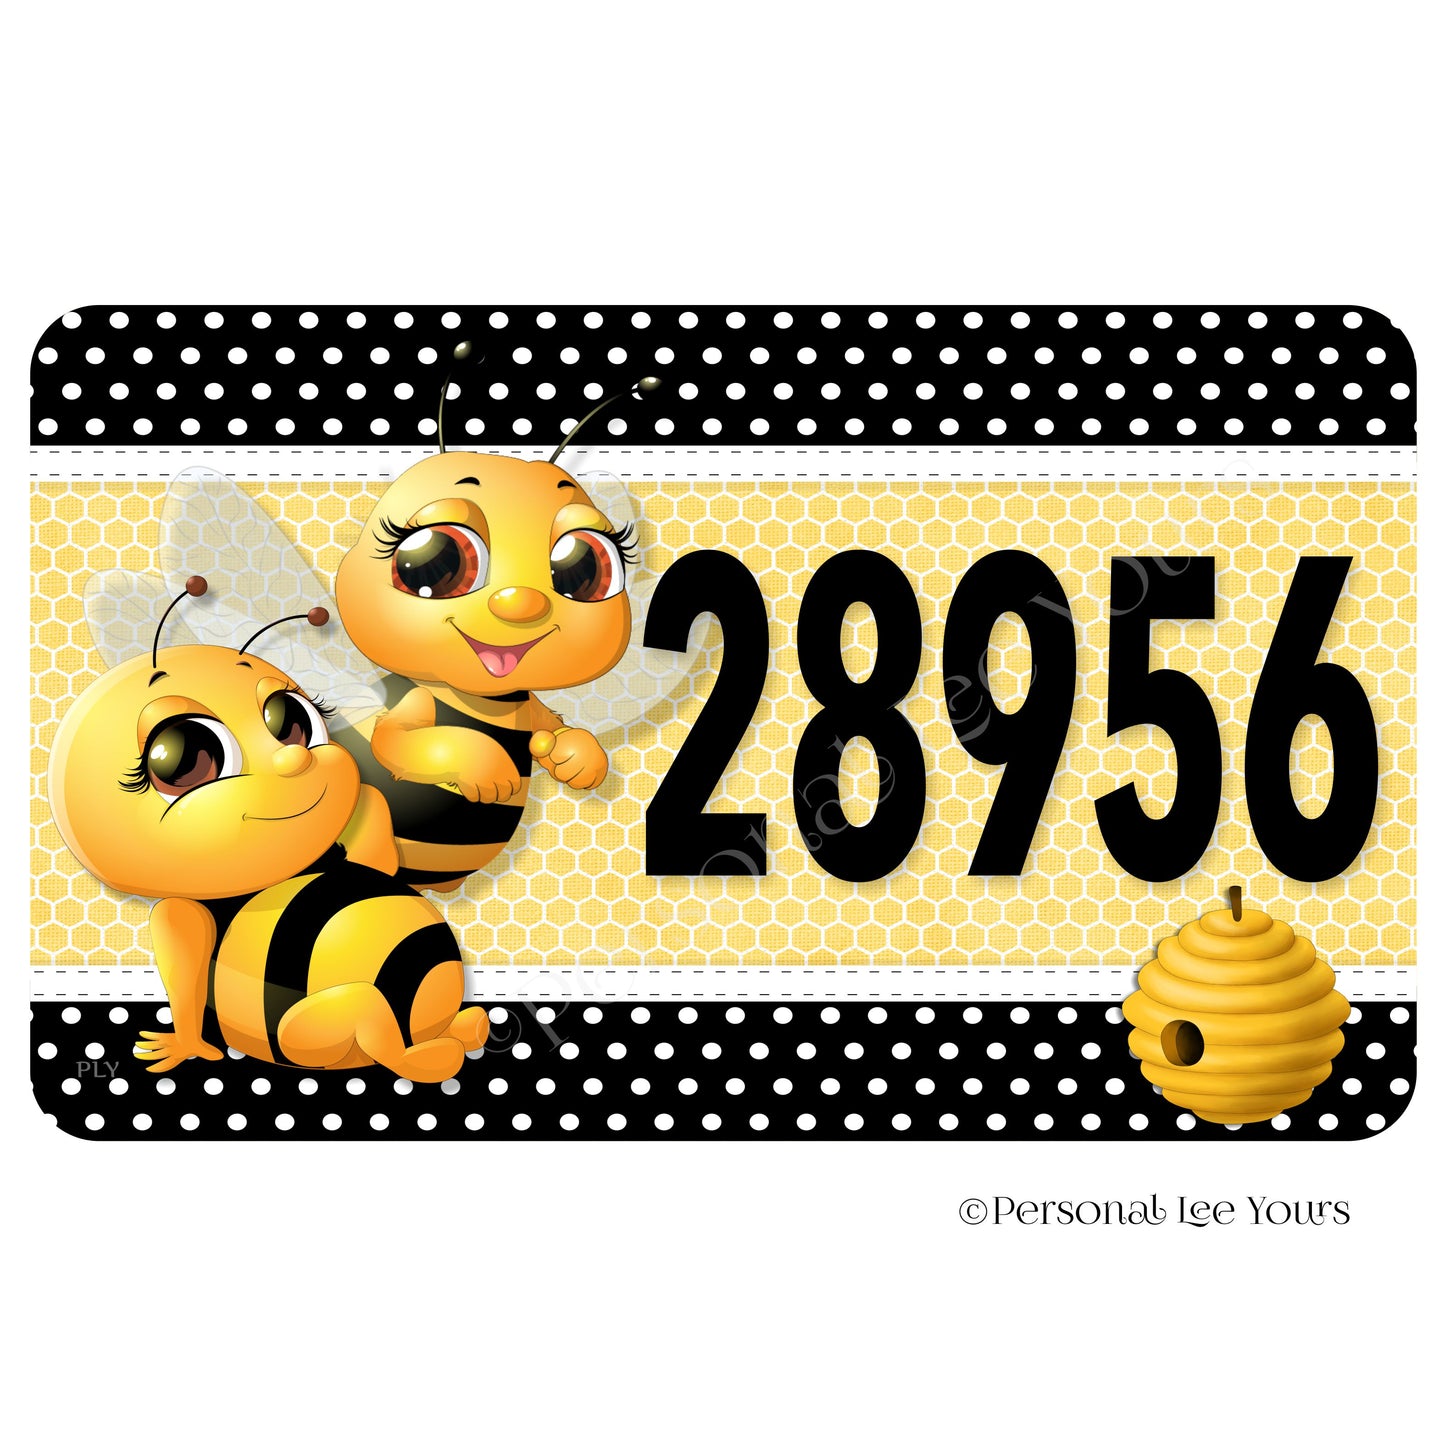 Personalized Wreath Sign * Bee Couple * Your House Number * Lightweight Metal